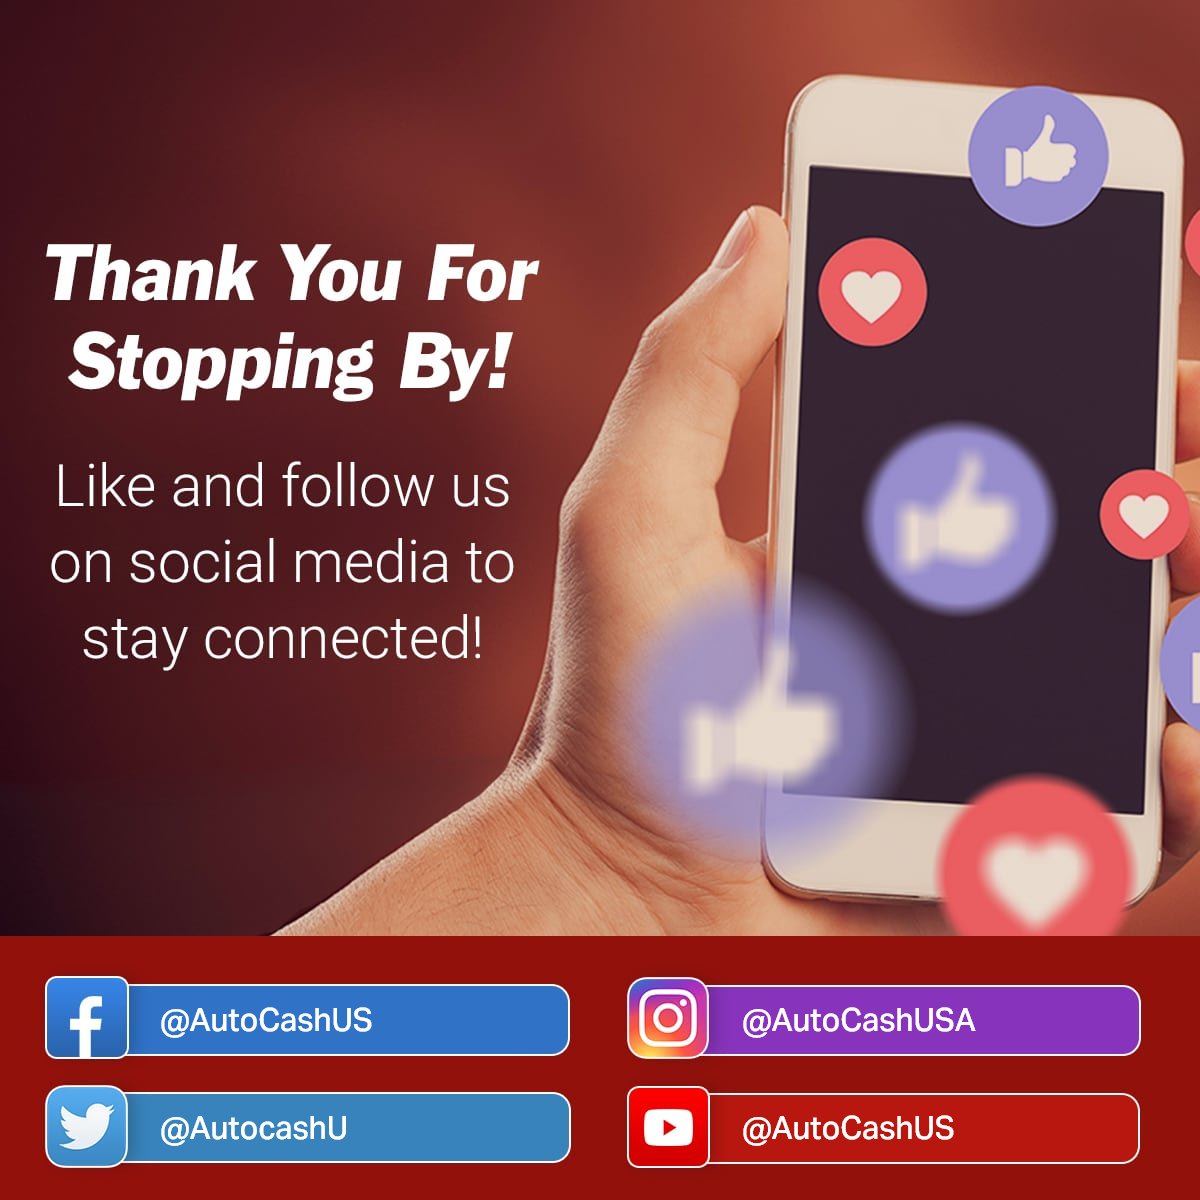 😍Thank you for visiting our page!👍 Follow us on our other social media links at the bottom of our homepage here: autocashusa.com 

#AutoCashUSA #cash #loans #cashloans #fastloans #personalloans #loanservices #onlineloans #loansonline